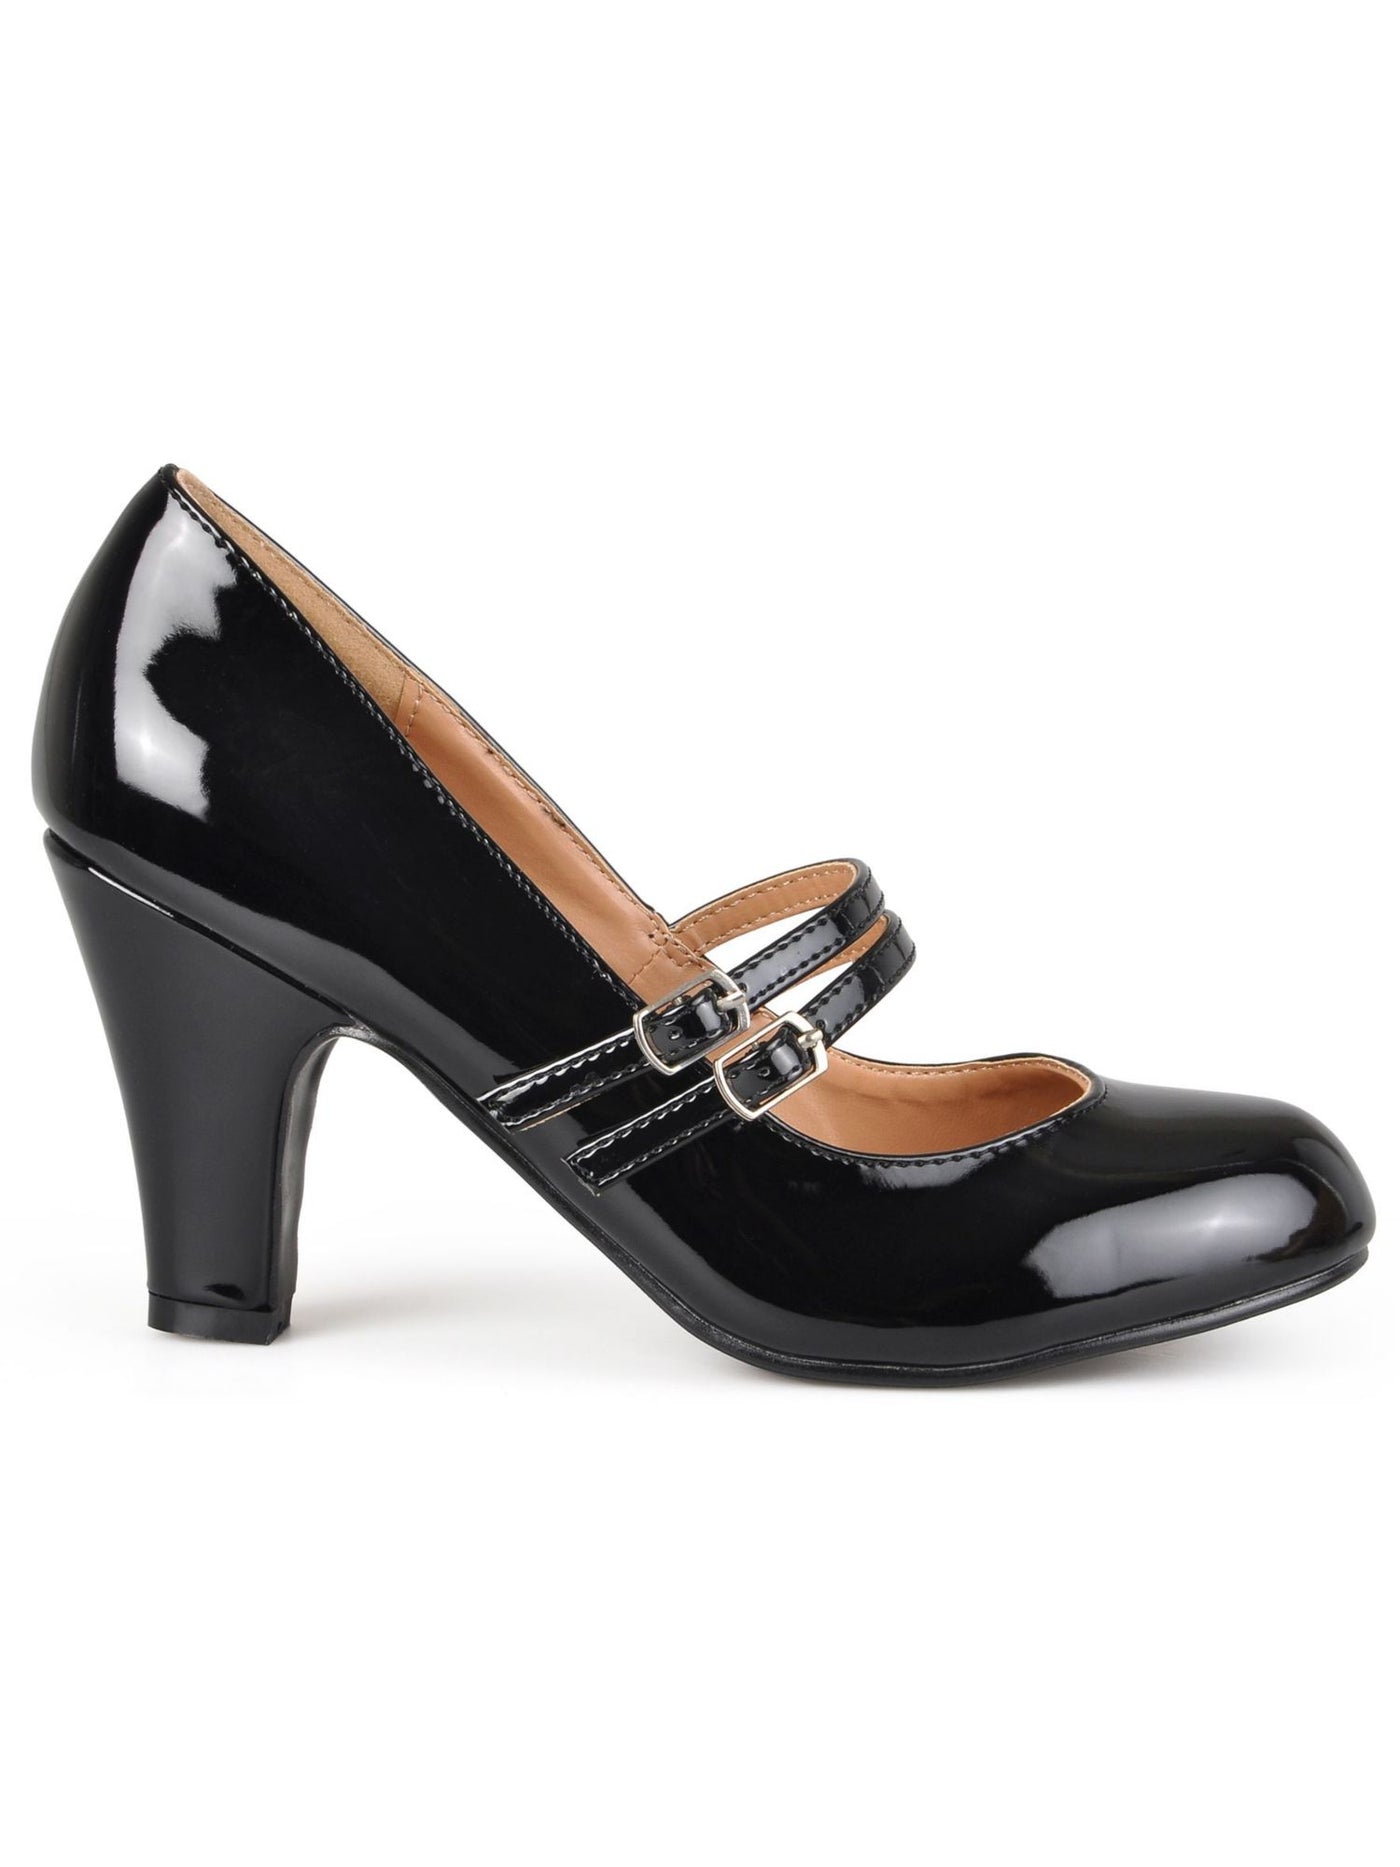 JOURNEE COLLECTION Womens Black Mary Jane Padded Wendy Round Toe Block Heel Buckle Pumps Shoes 6.5